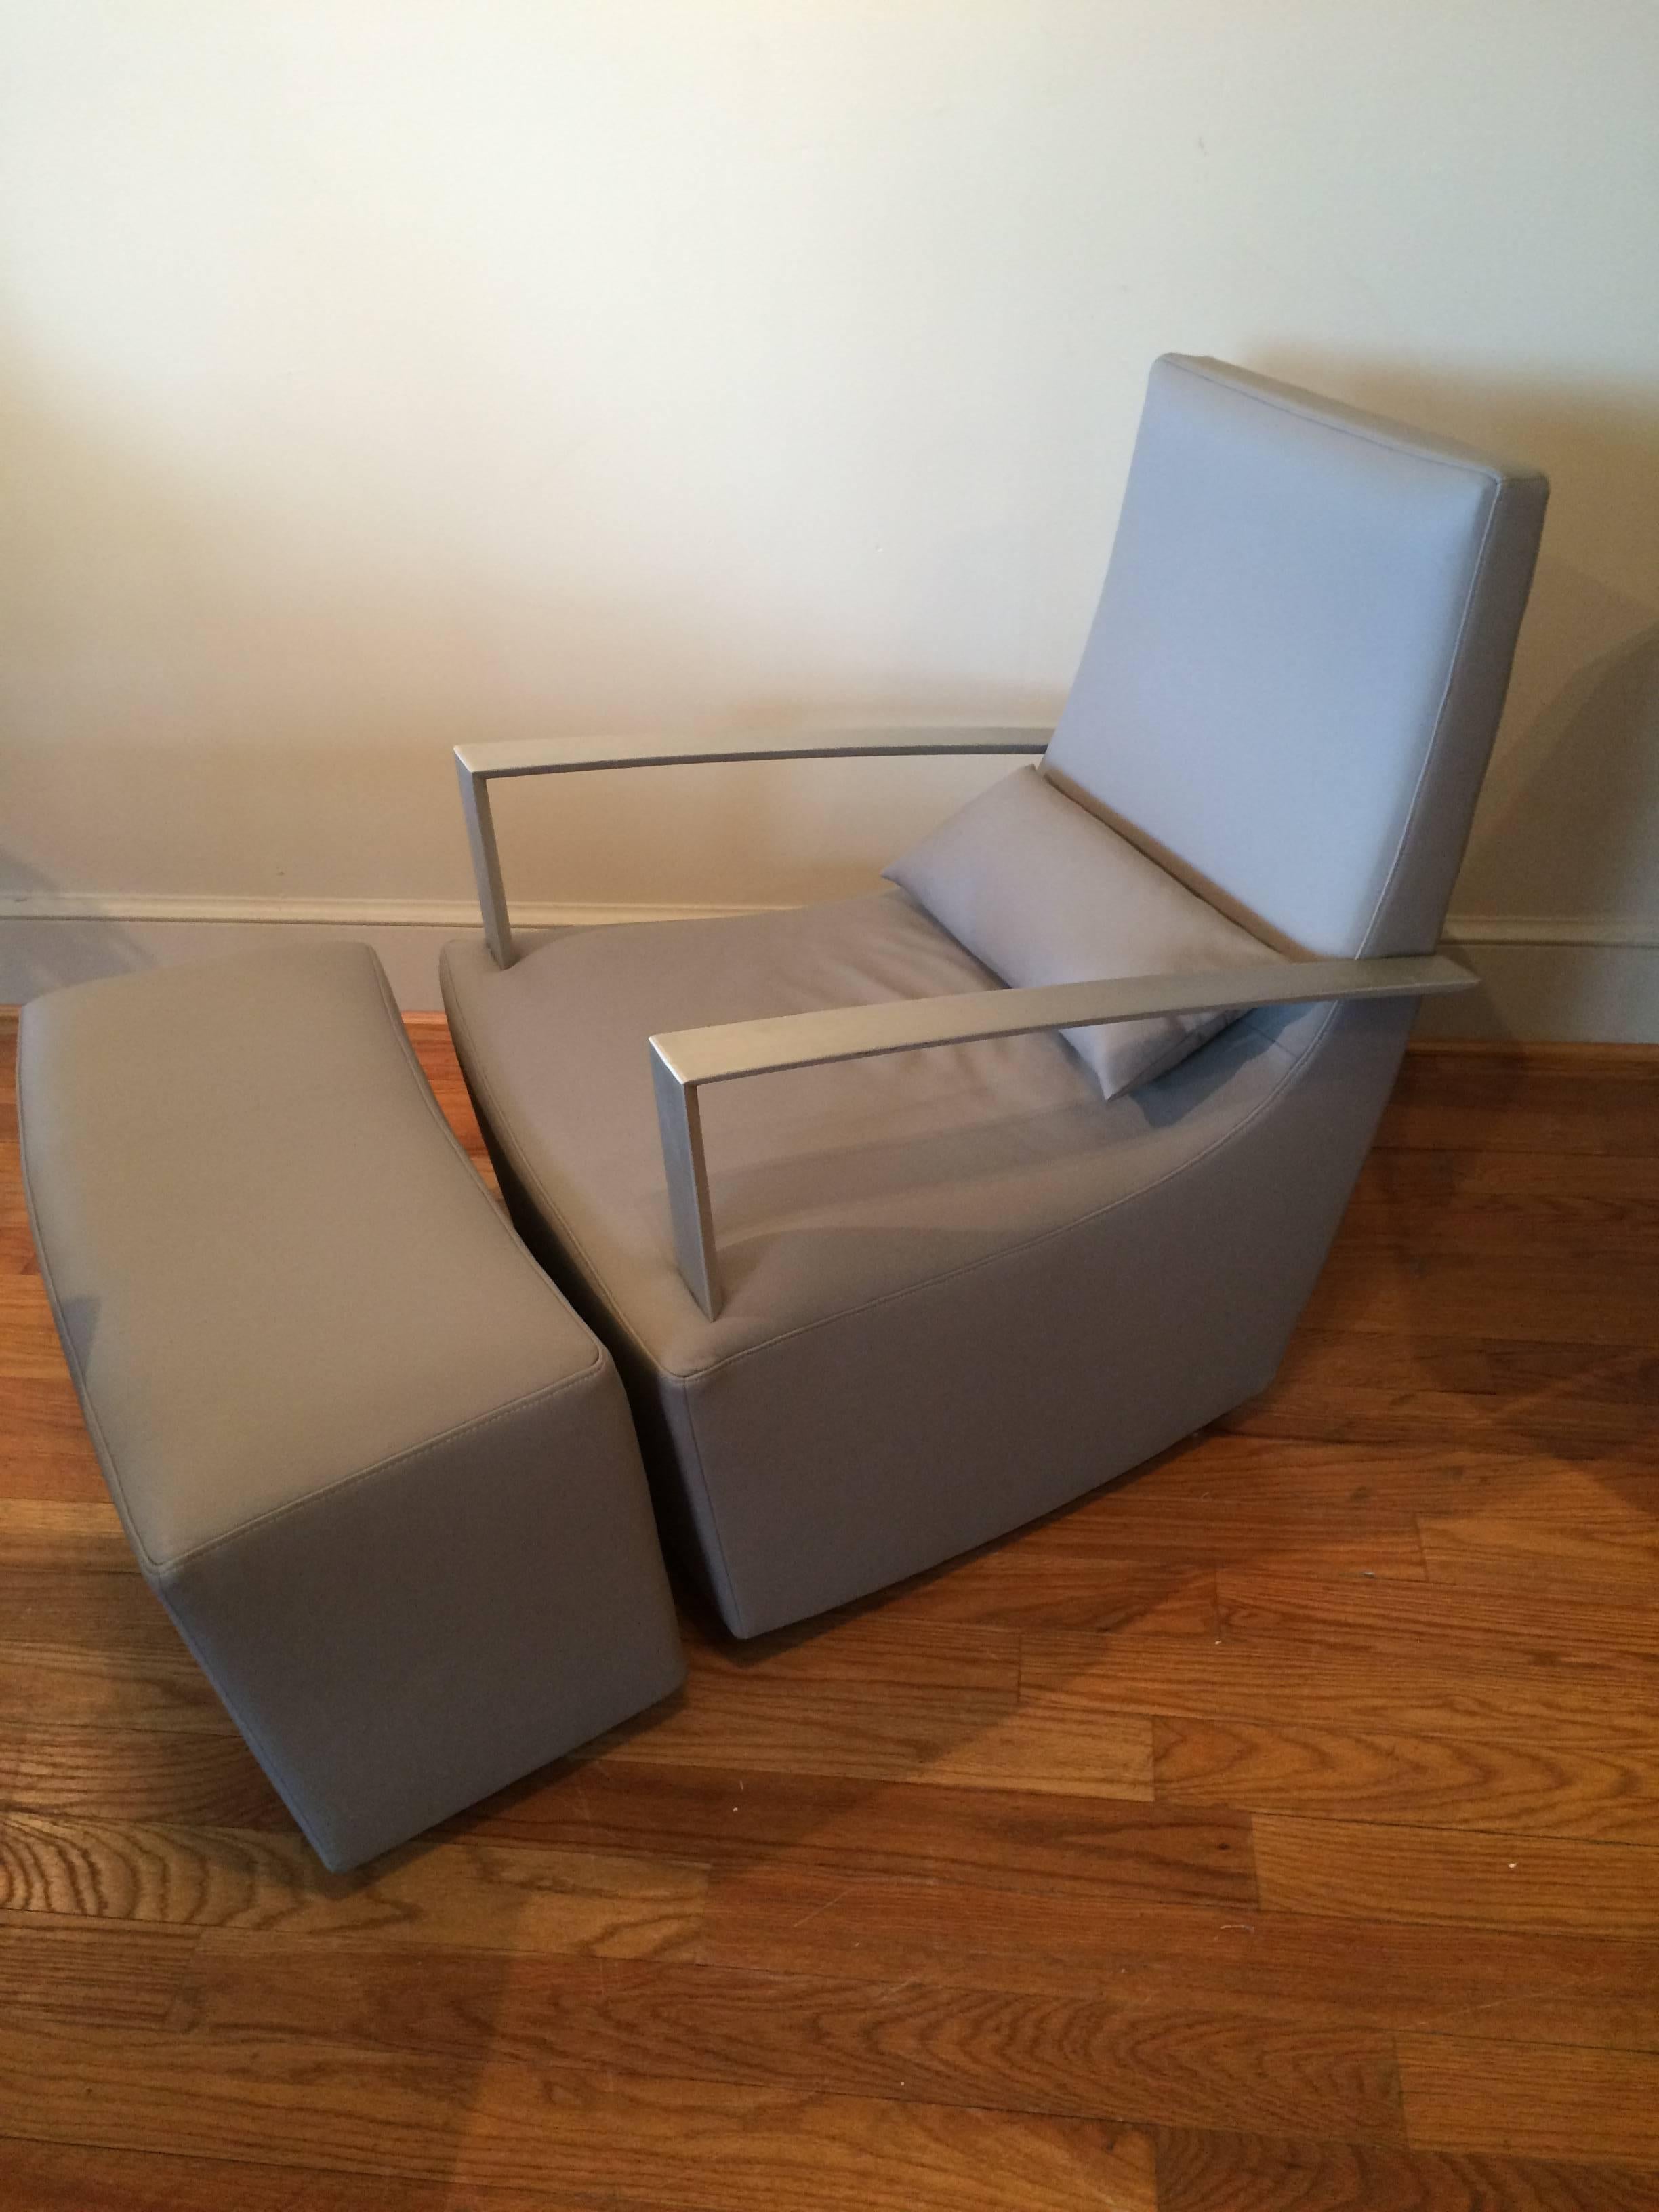 The Mid-Century Modern gray leather armchair and ottoman set with Brushed Steel Arms is a great example of mid-century modern design. The recently reupholstered modern gray leather combined with the sophistication of brushed steel arms gives this